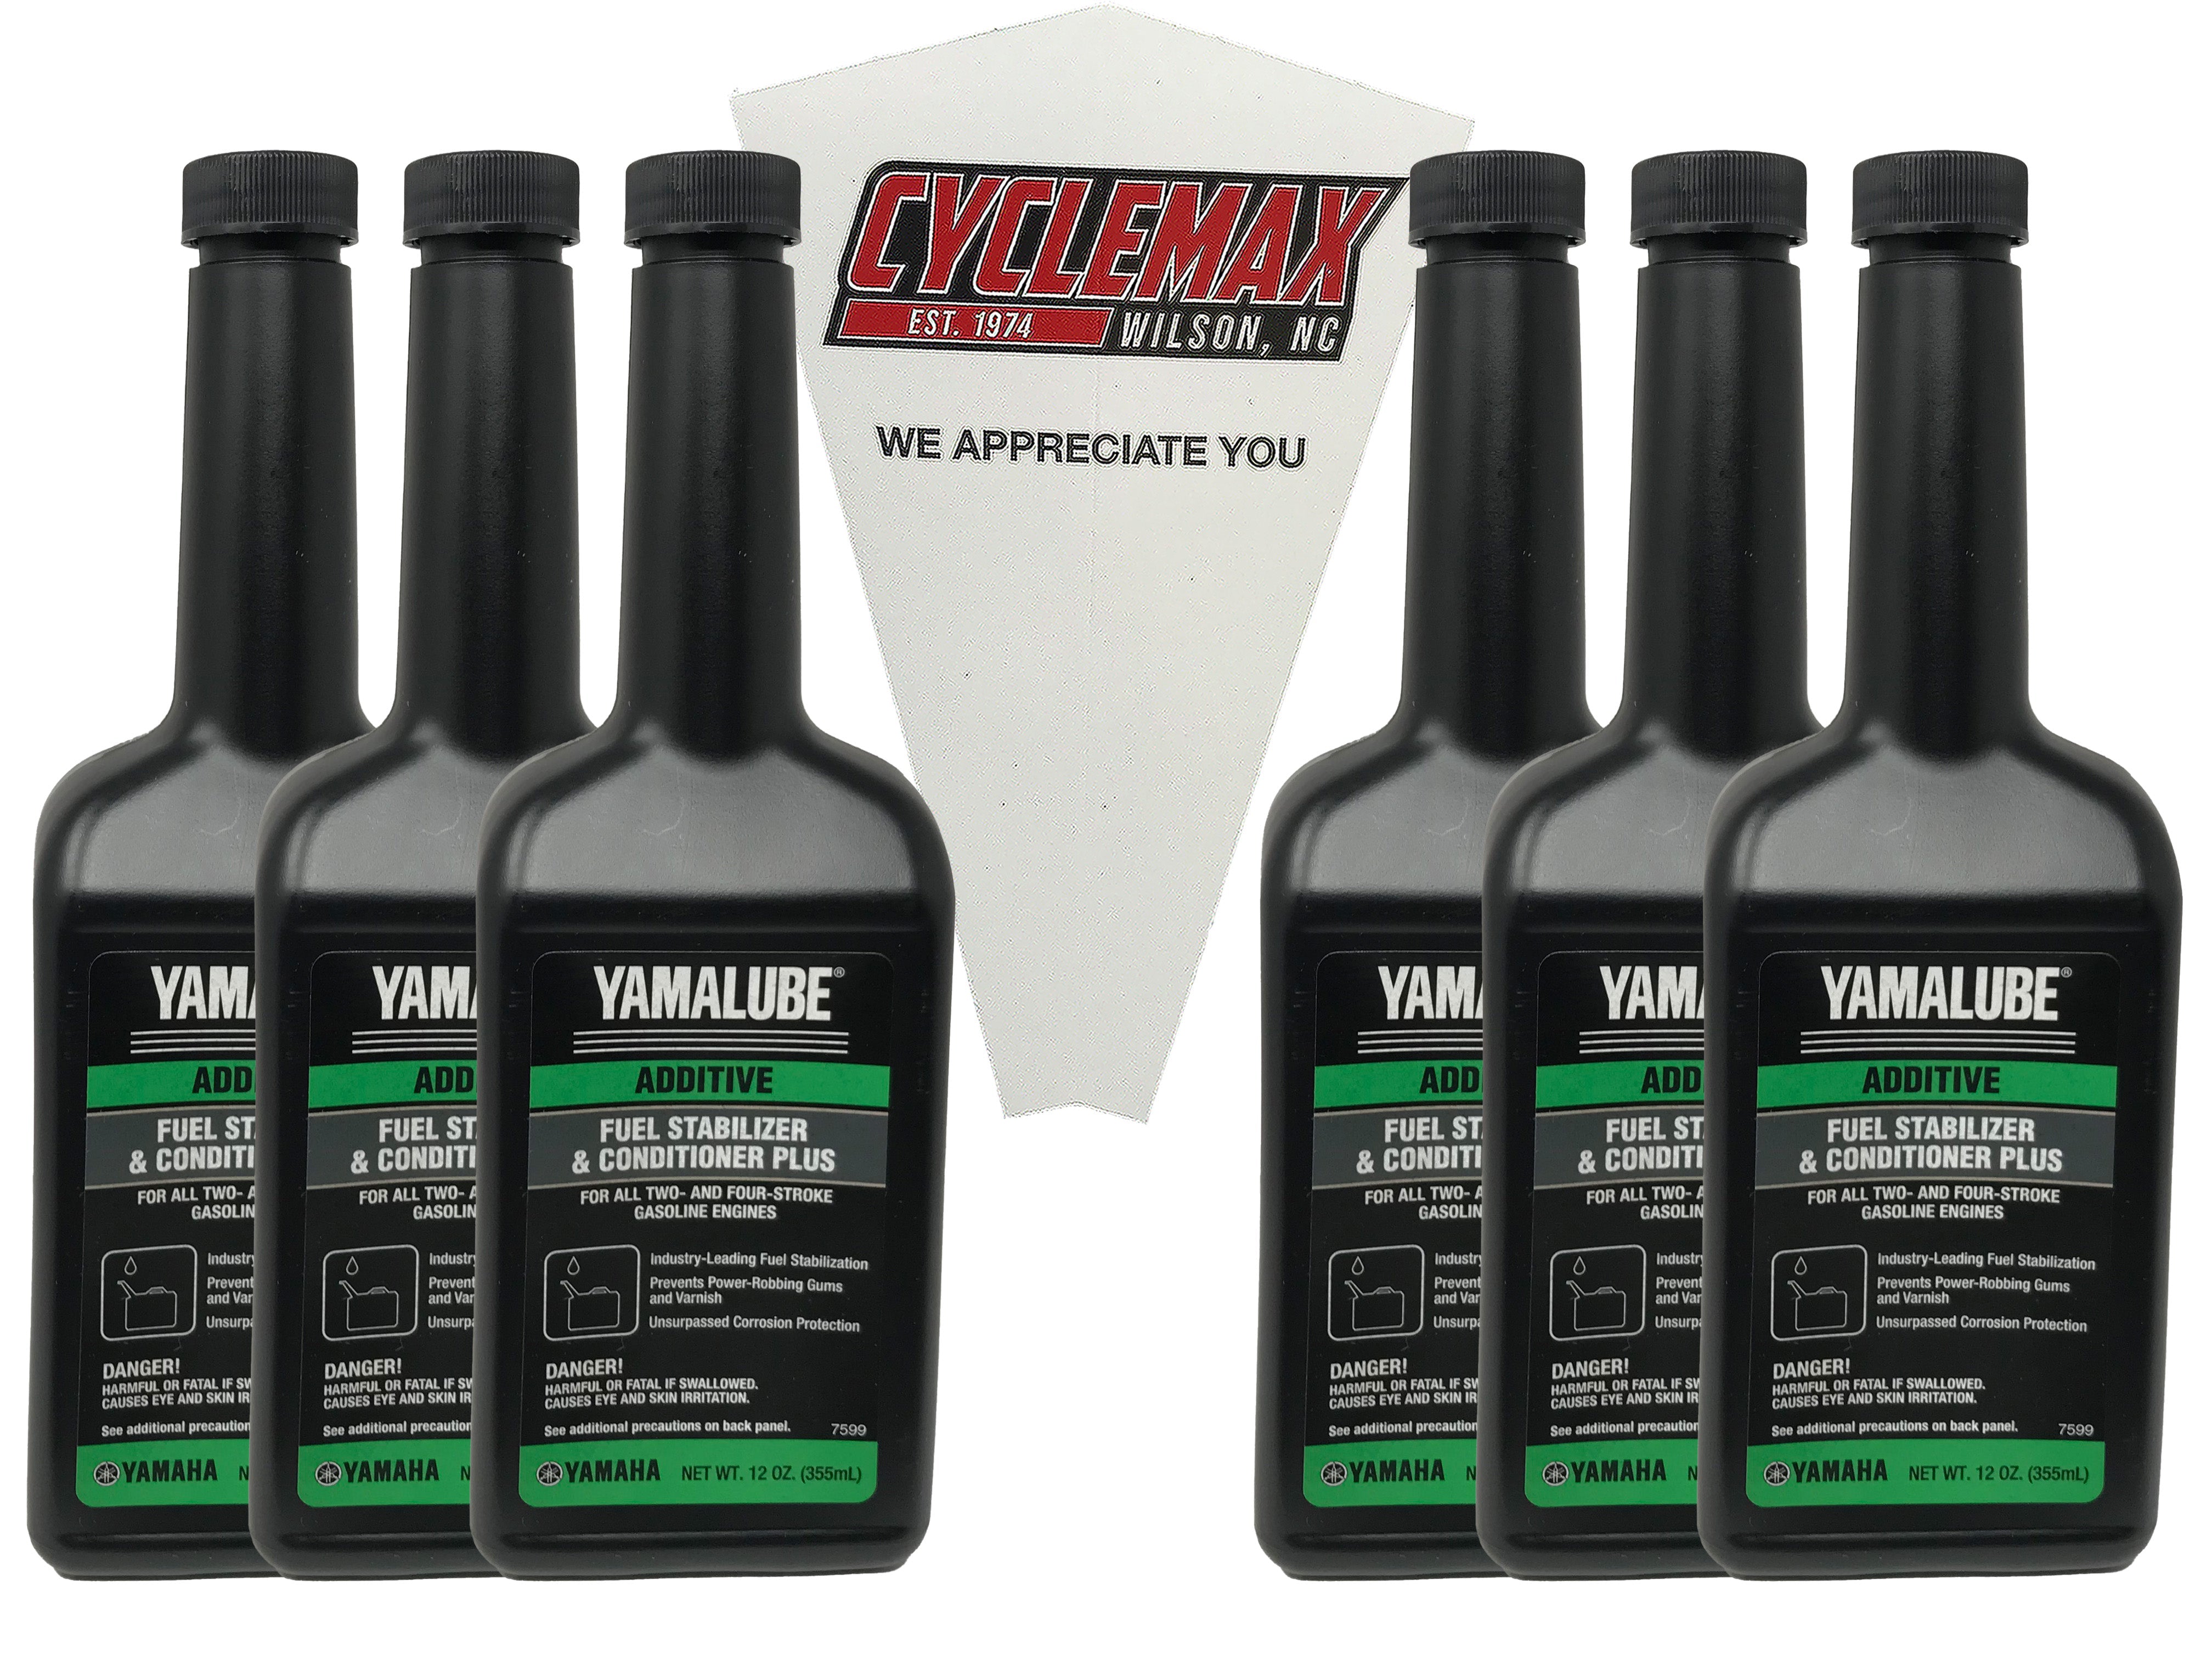 CYCLEMAX Six Pack for Yamaha Yamalube Fuel Stabilizer & Conditioner Plus ACC-FSTAB-PL-12 Contains Six 12oz Bottles and a Funnel